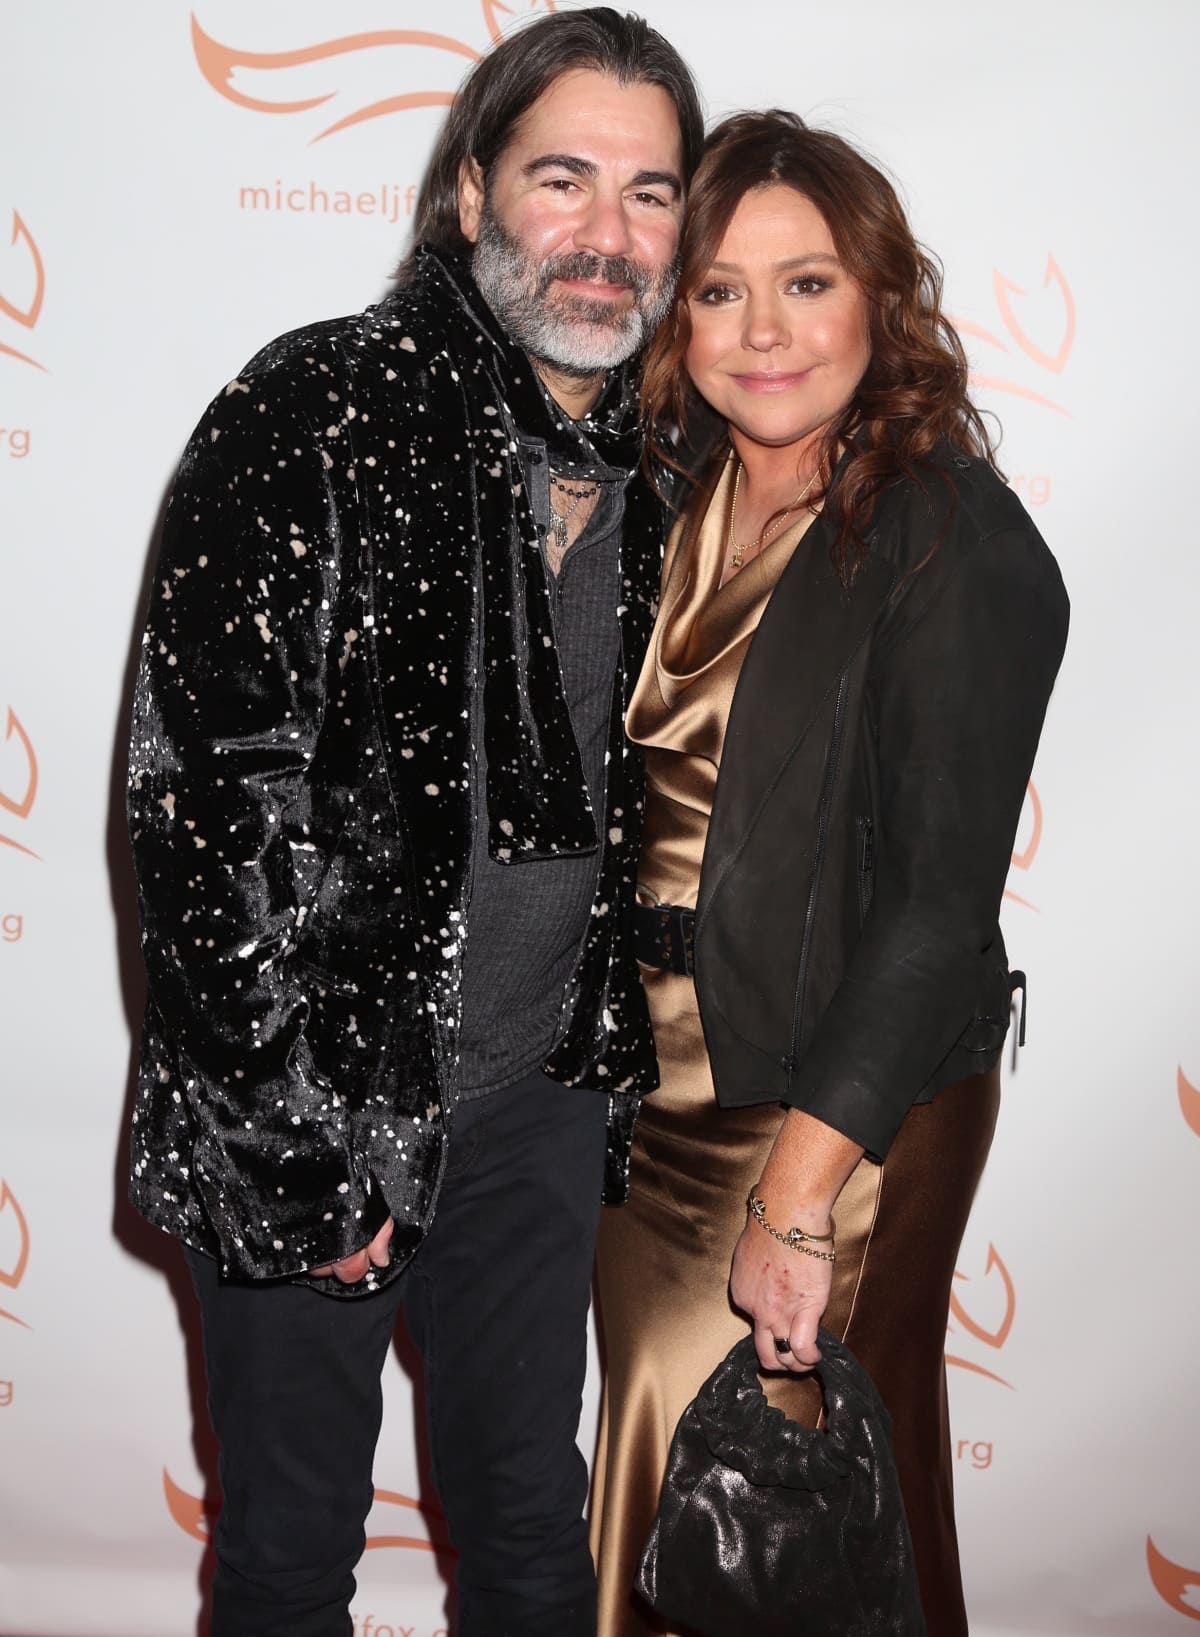 Rachael Ray with husband John Cusimano attending the A Funny Thing Happened on the Way to Cure Parkinson’s benefit for The Michael J. Fox Foundation for Parkinson’s Research